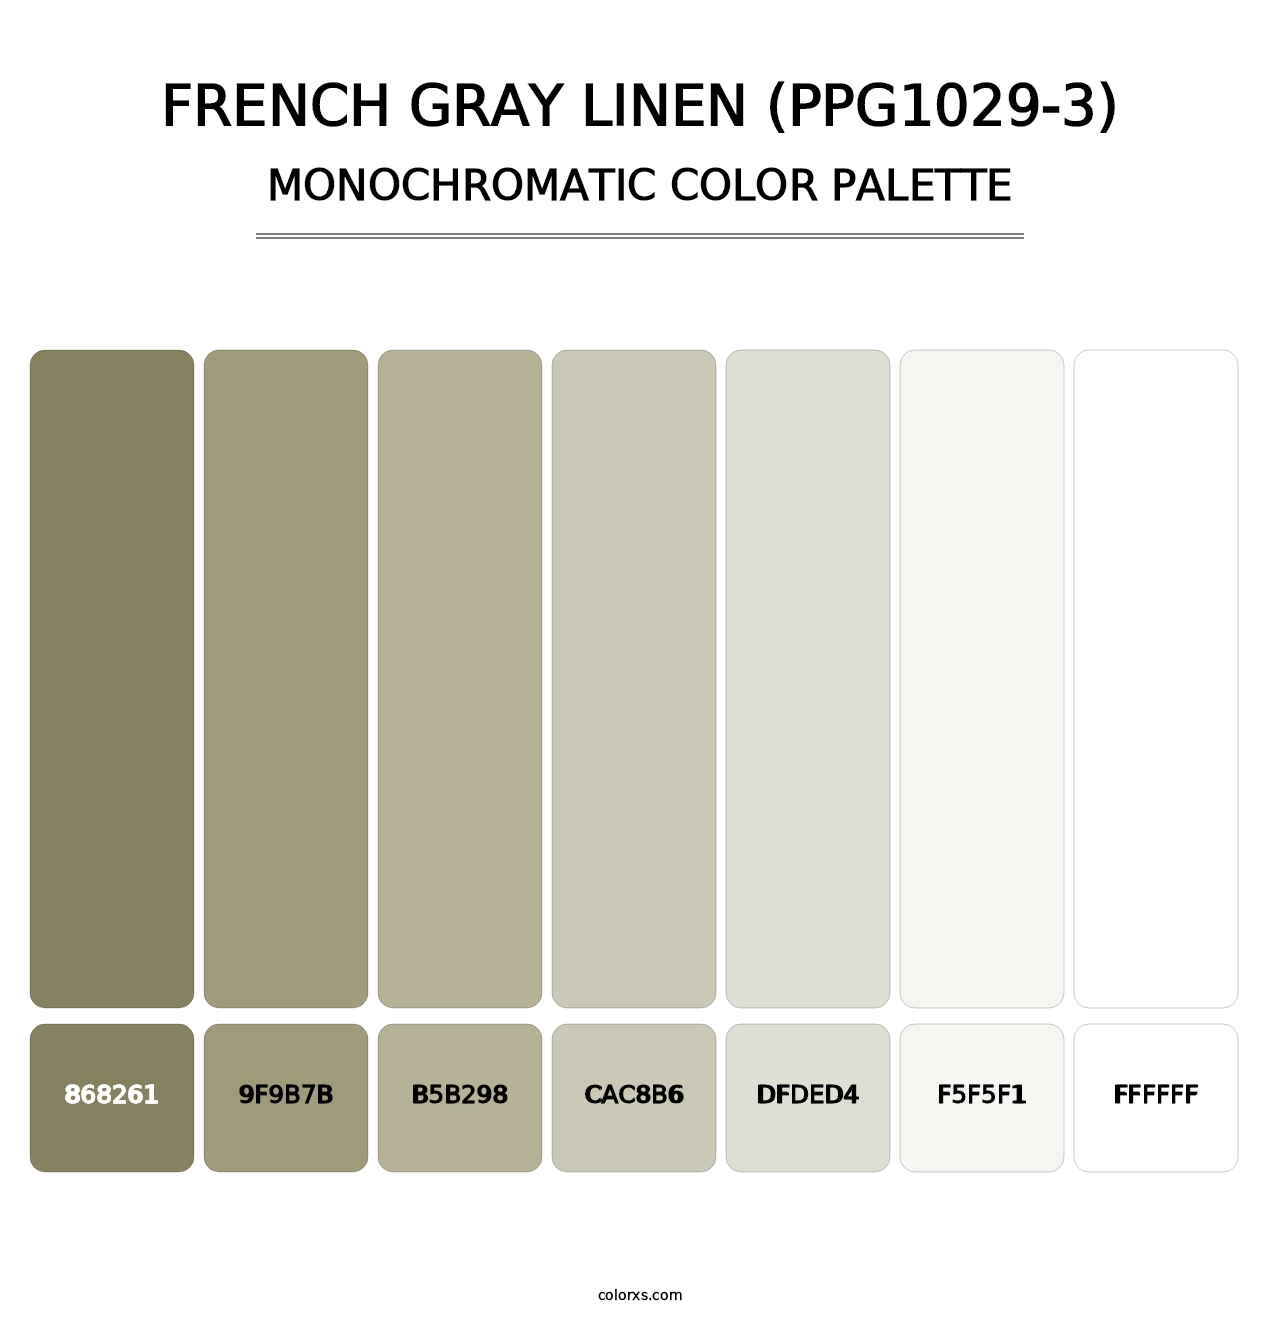 French Gray Linen (PPG1029-3) - Monochromatic Color Palette